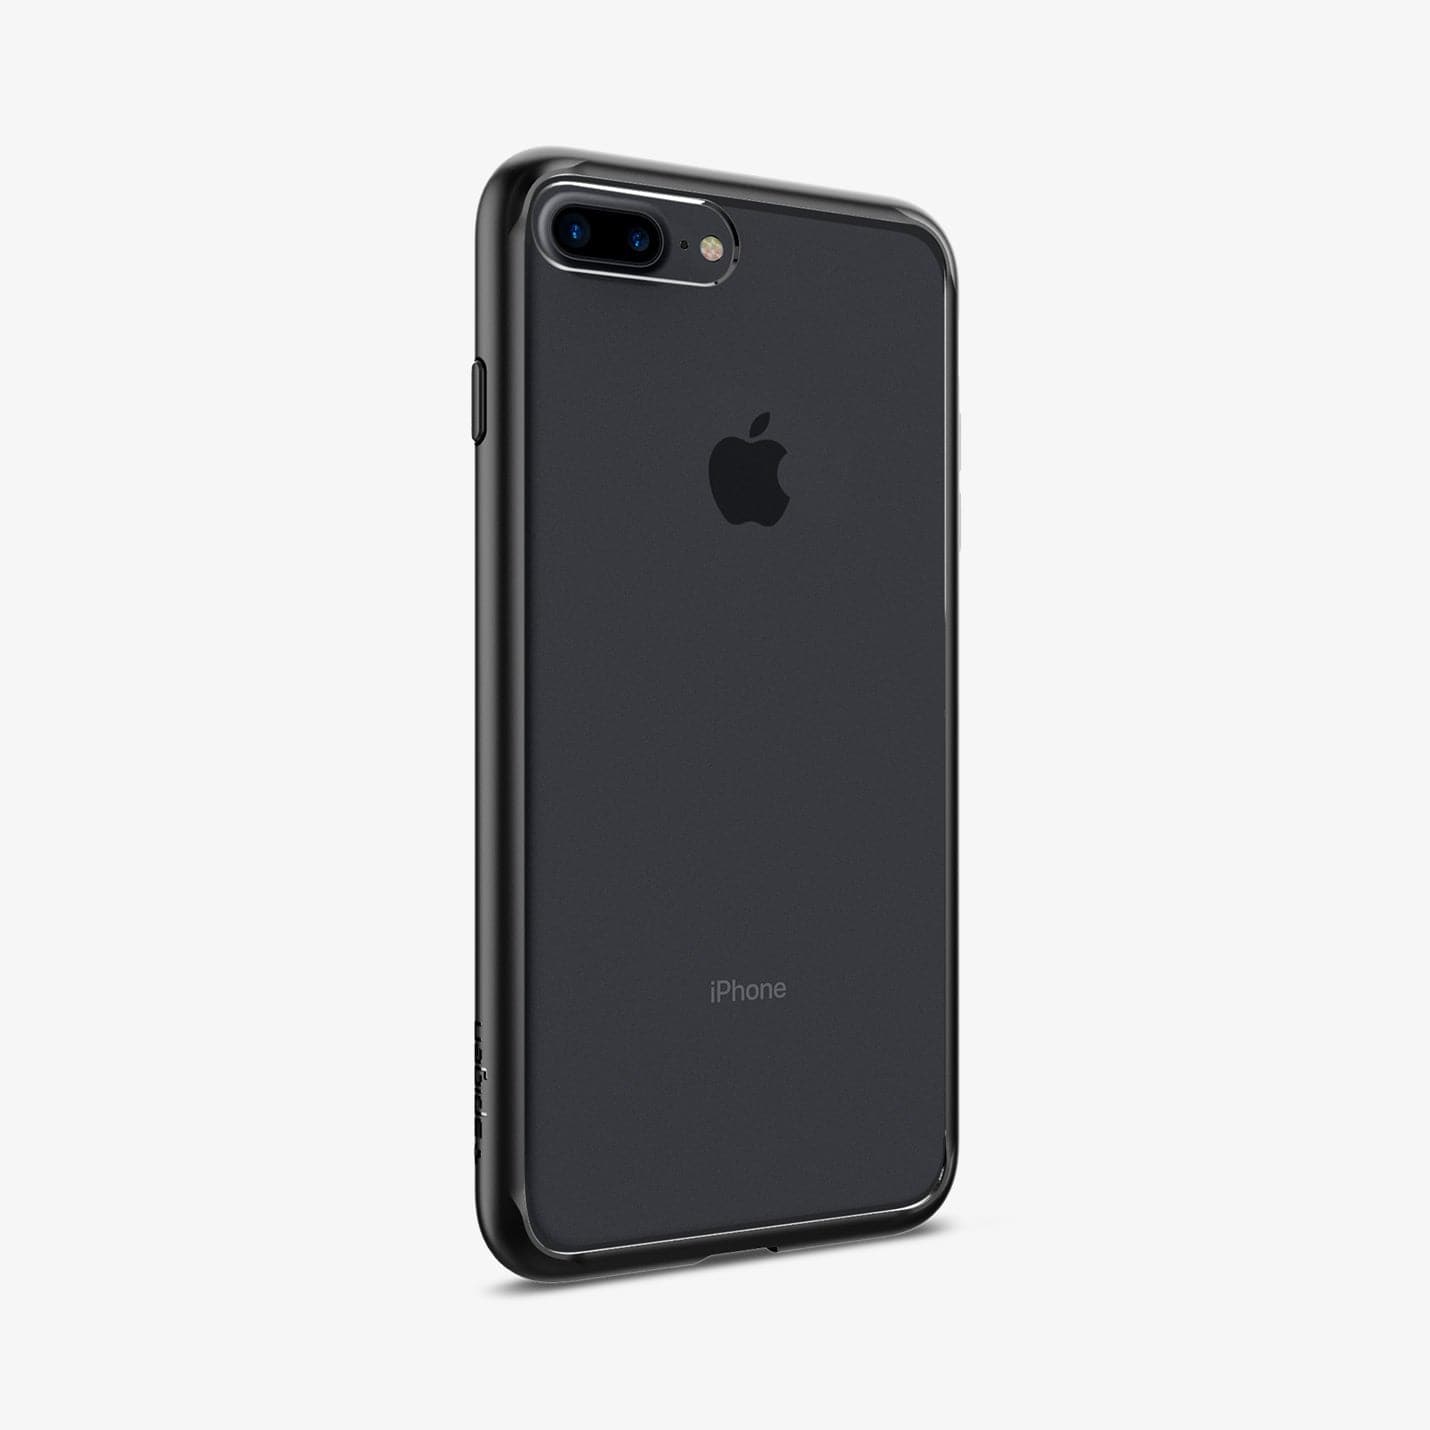 043CS20550 - iPhone 7 Series Ultra Hybrid Case in Black showing the back, partial side